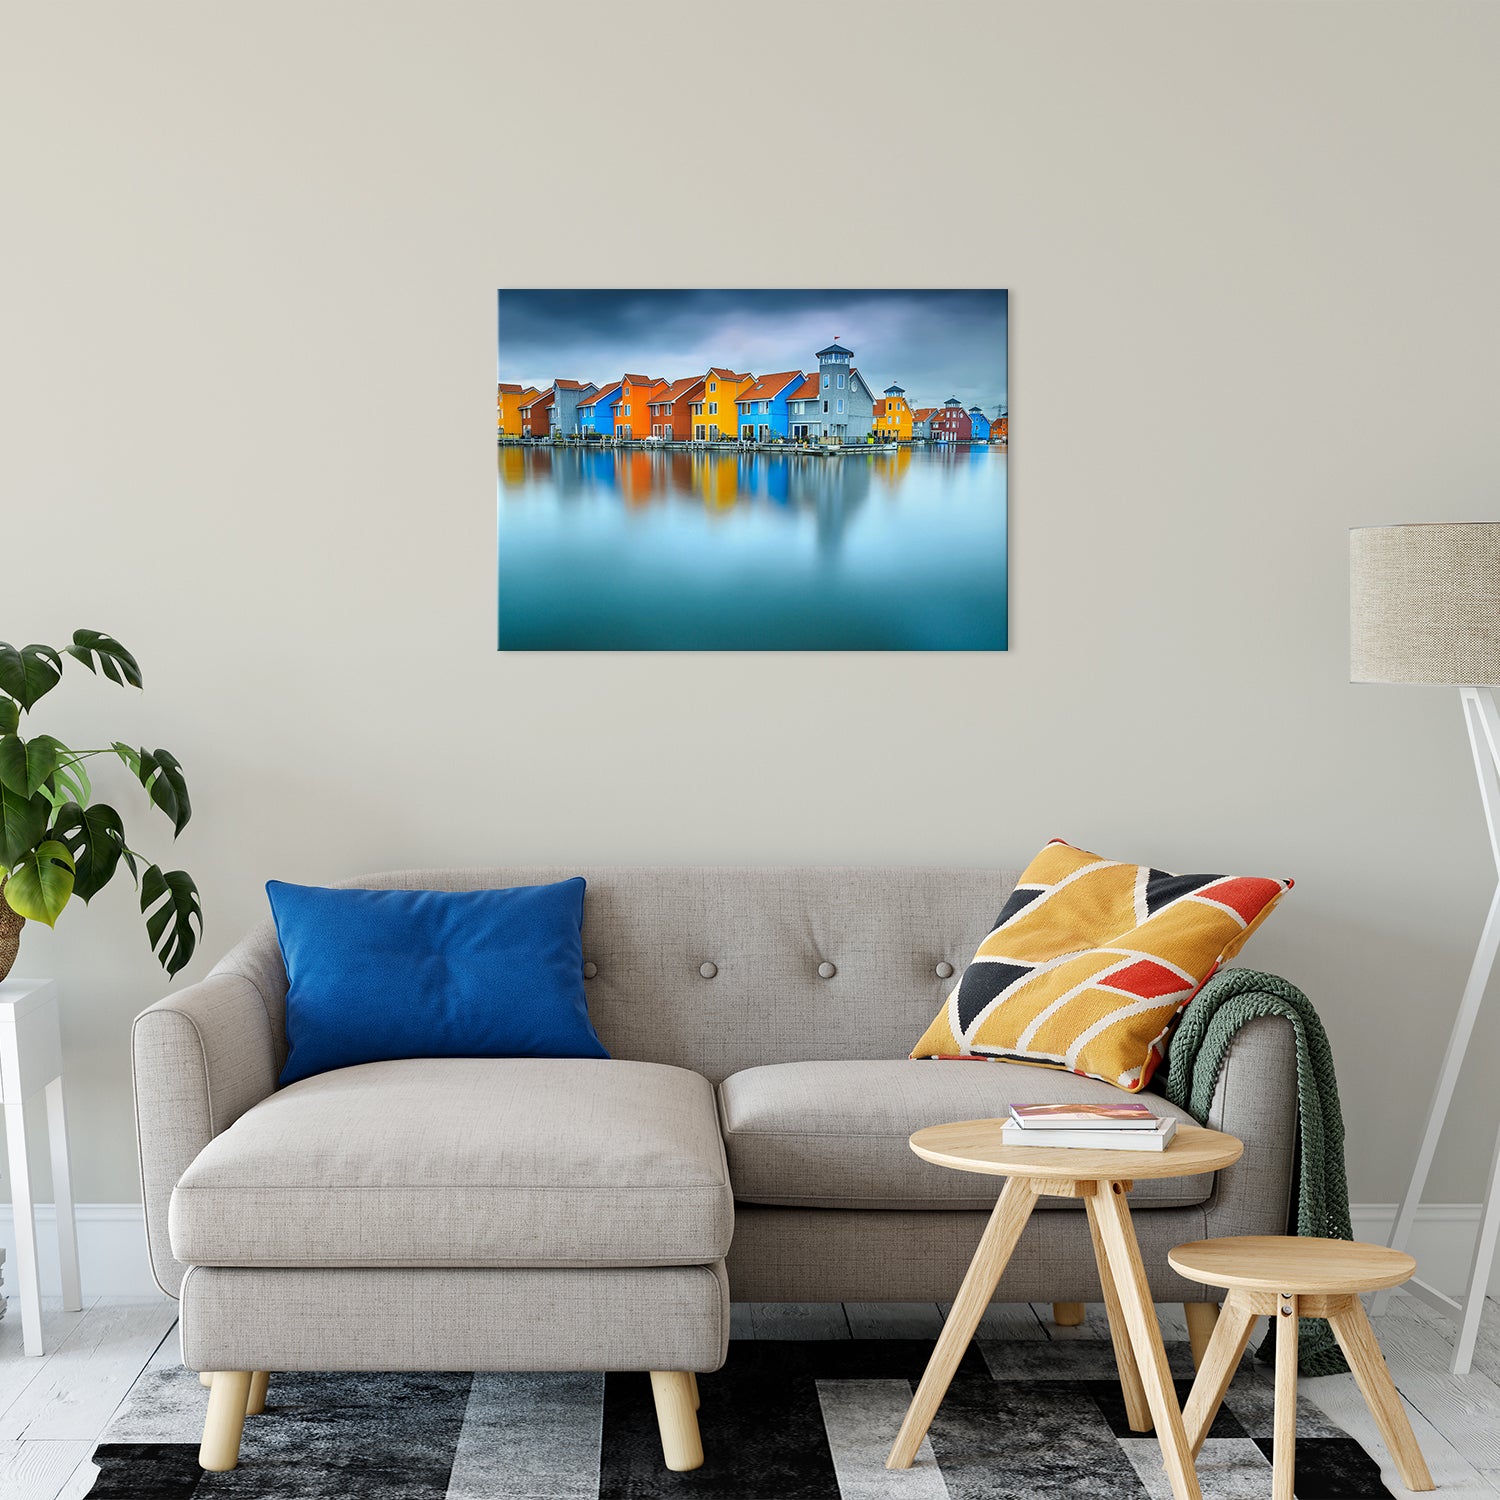 Blue Morning at Waters Edge Groningen Netherlands Europe Landscape Wall Art Canvas Prints 24" x 36" - PIPAFINEART